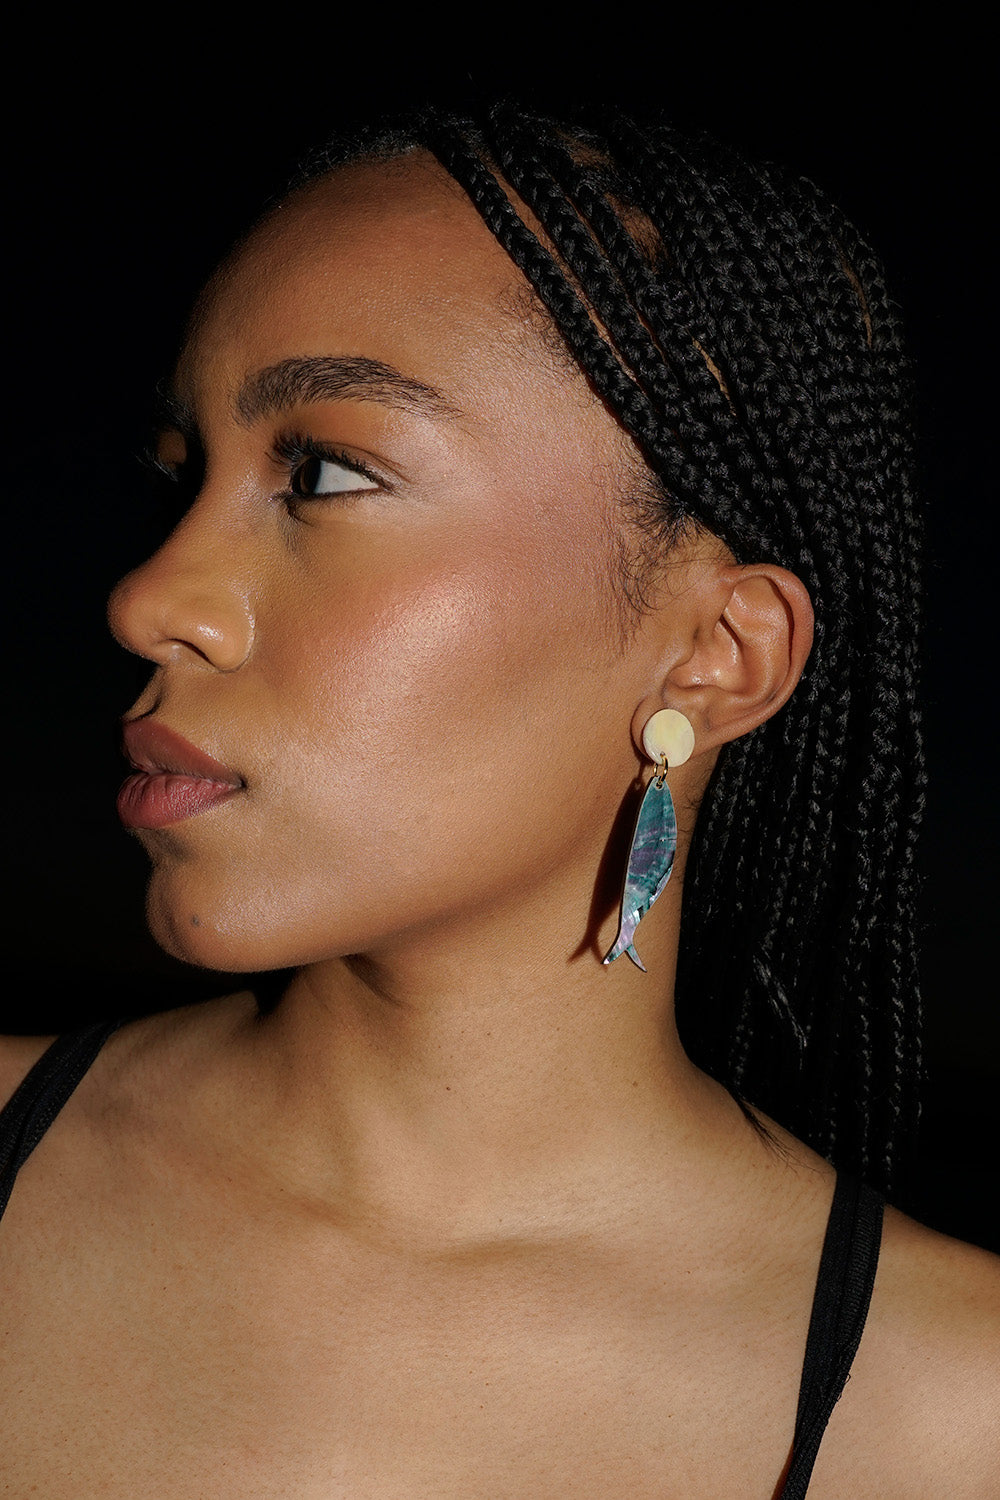 Mix and match sardine earrings in shell